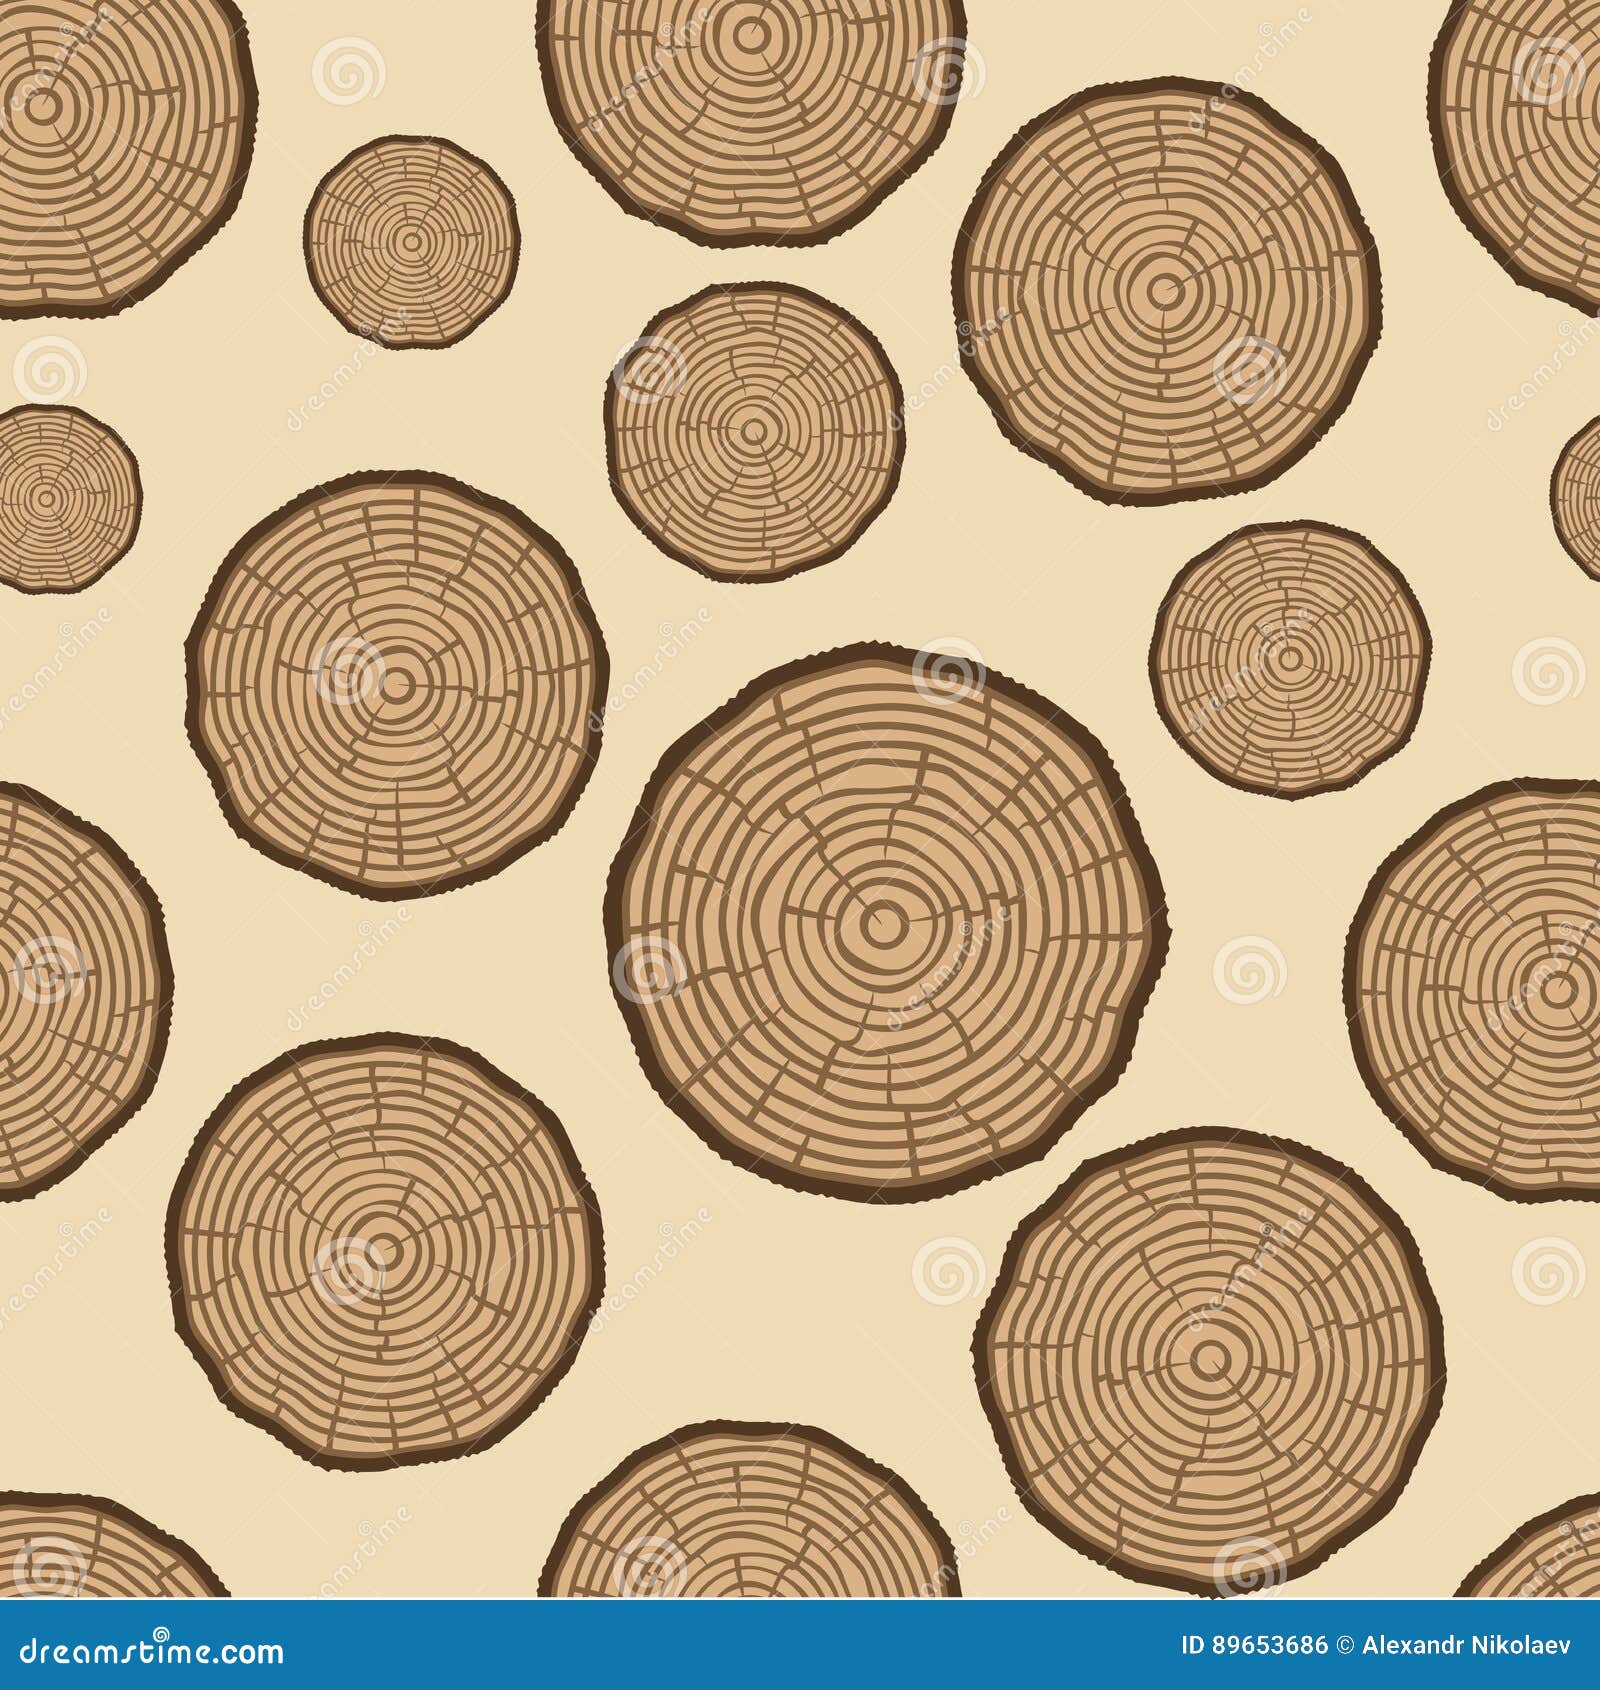 Tree Rings Seamless Vector Pattern. Saw Cut Tree Trunk Background ...